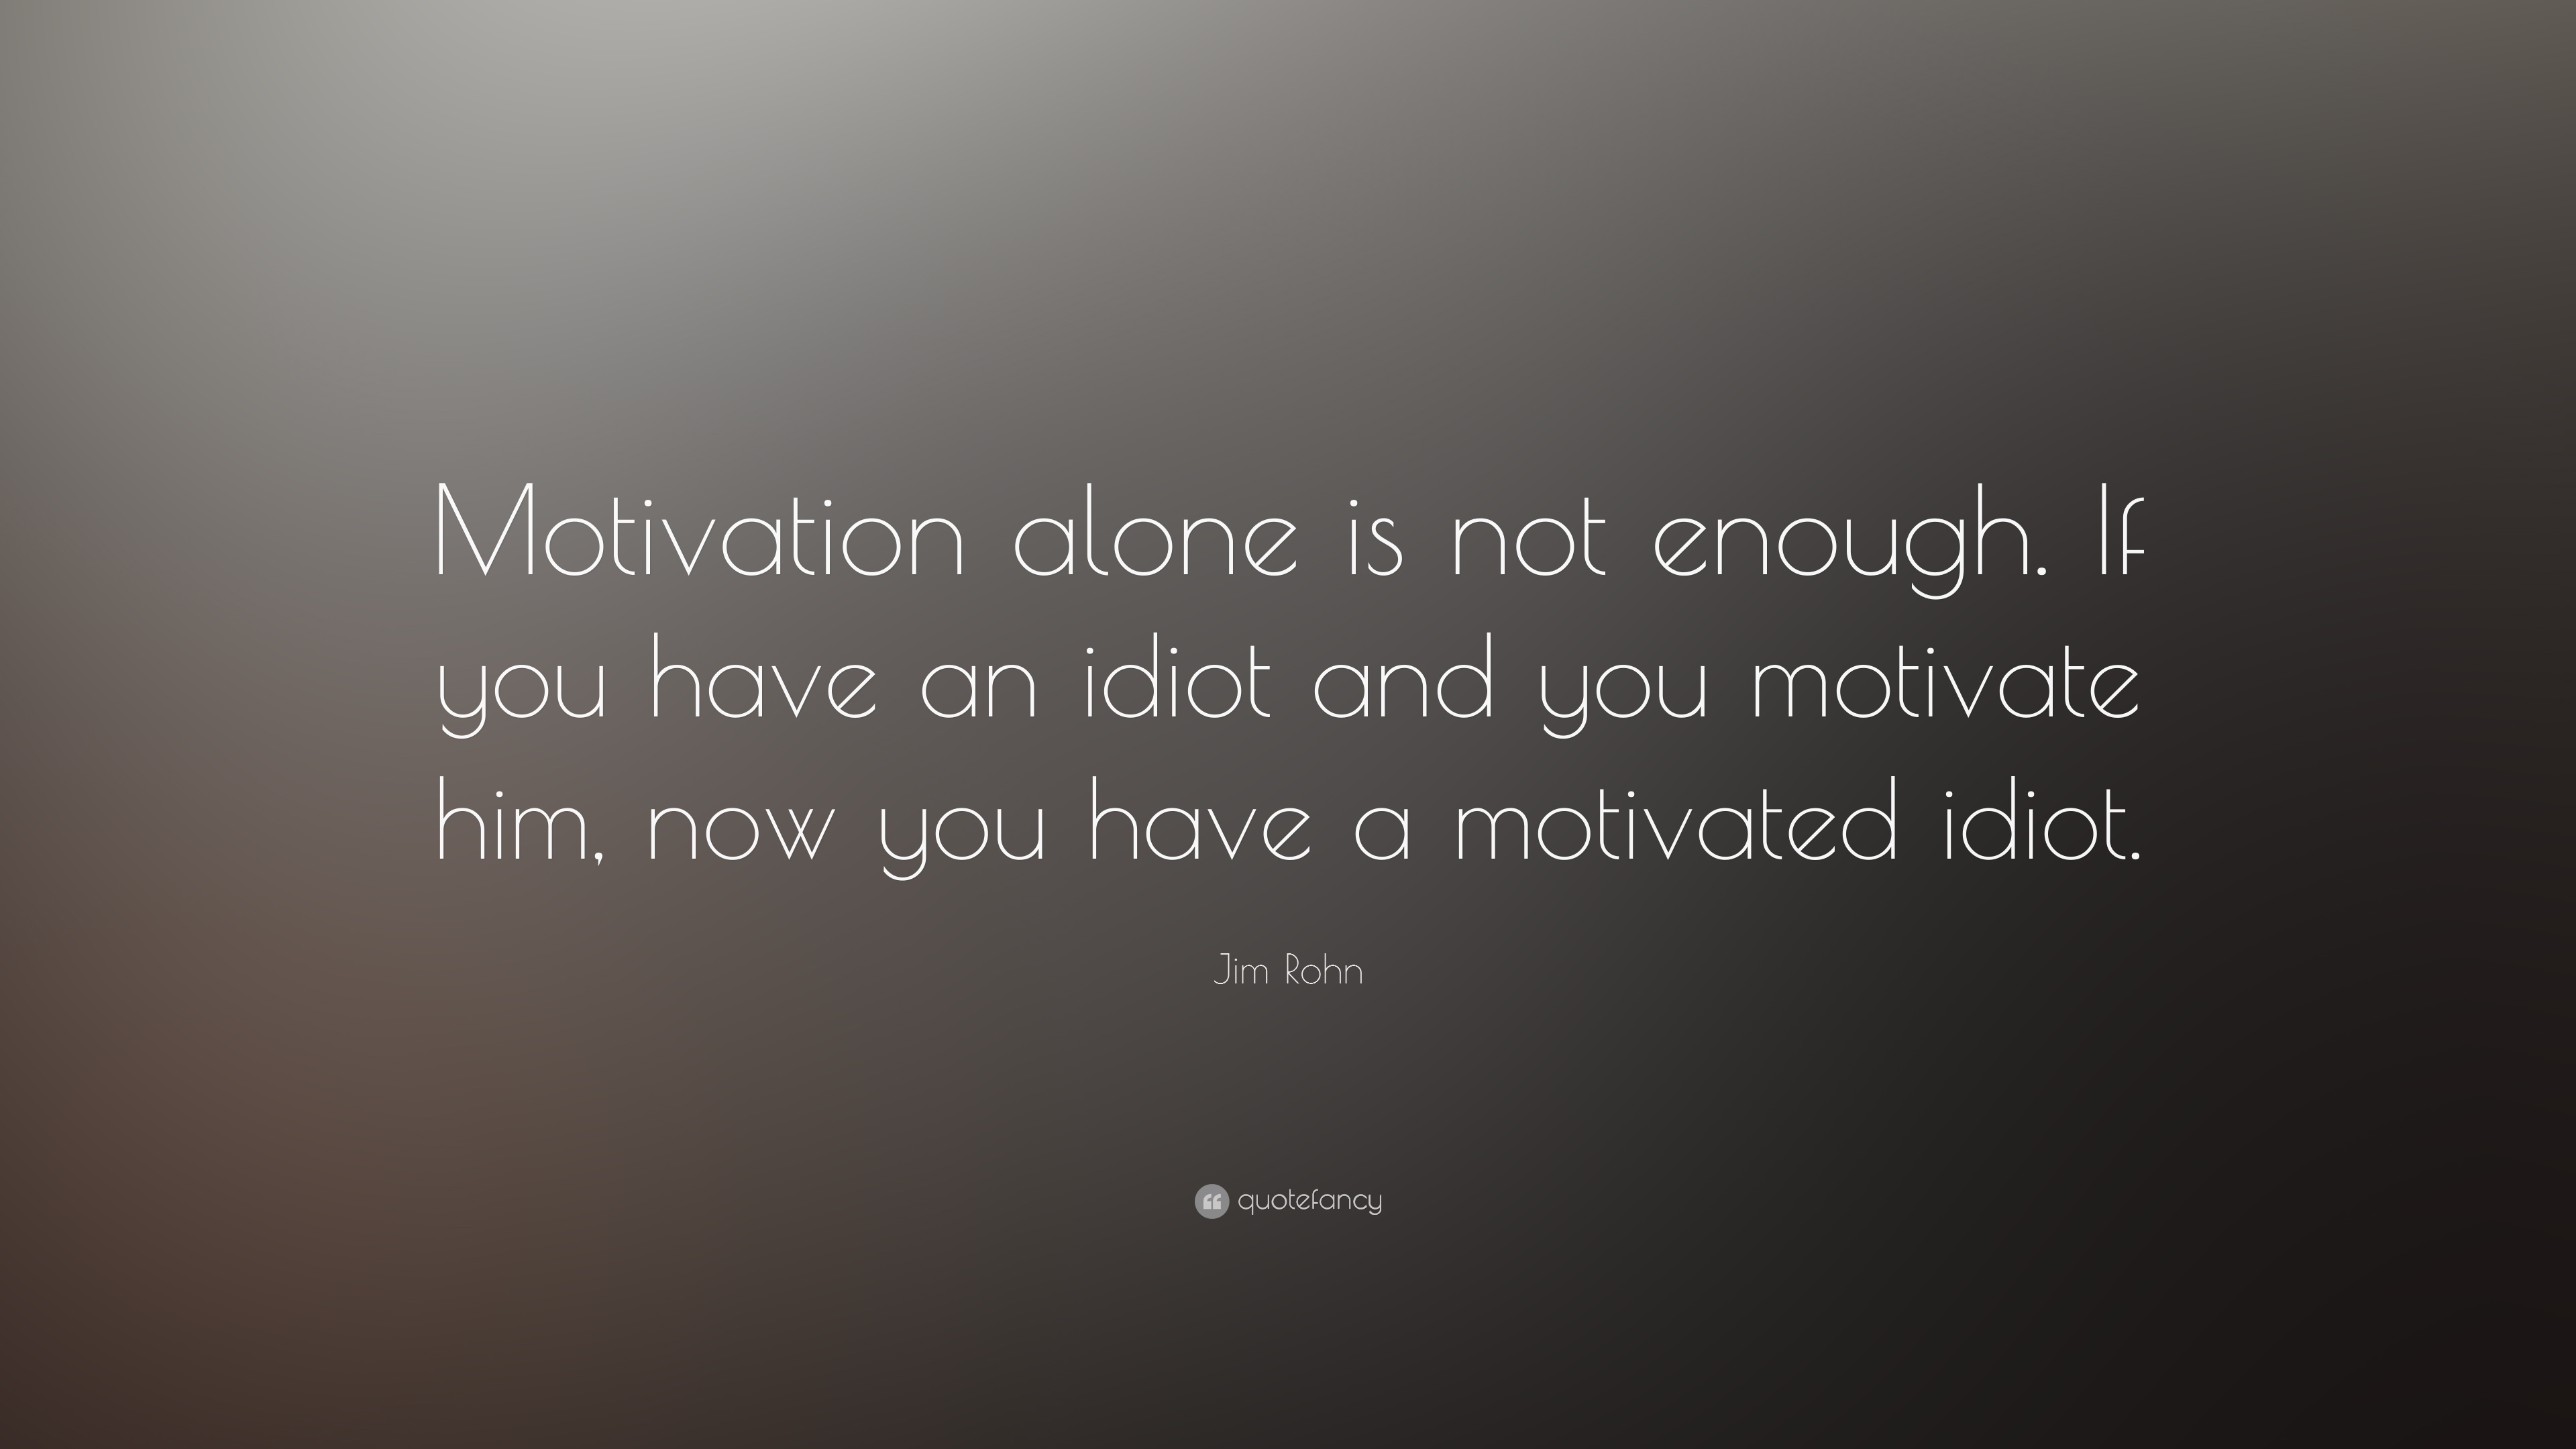 Jim Rohn Quote: “Motivation alone is not enough. If you have an ...